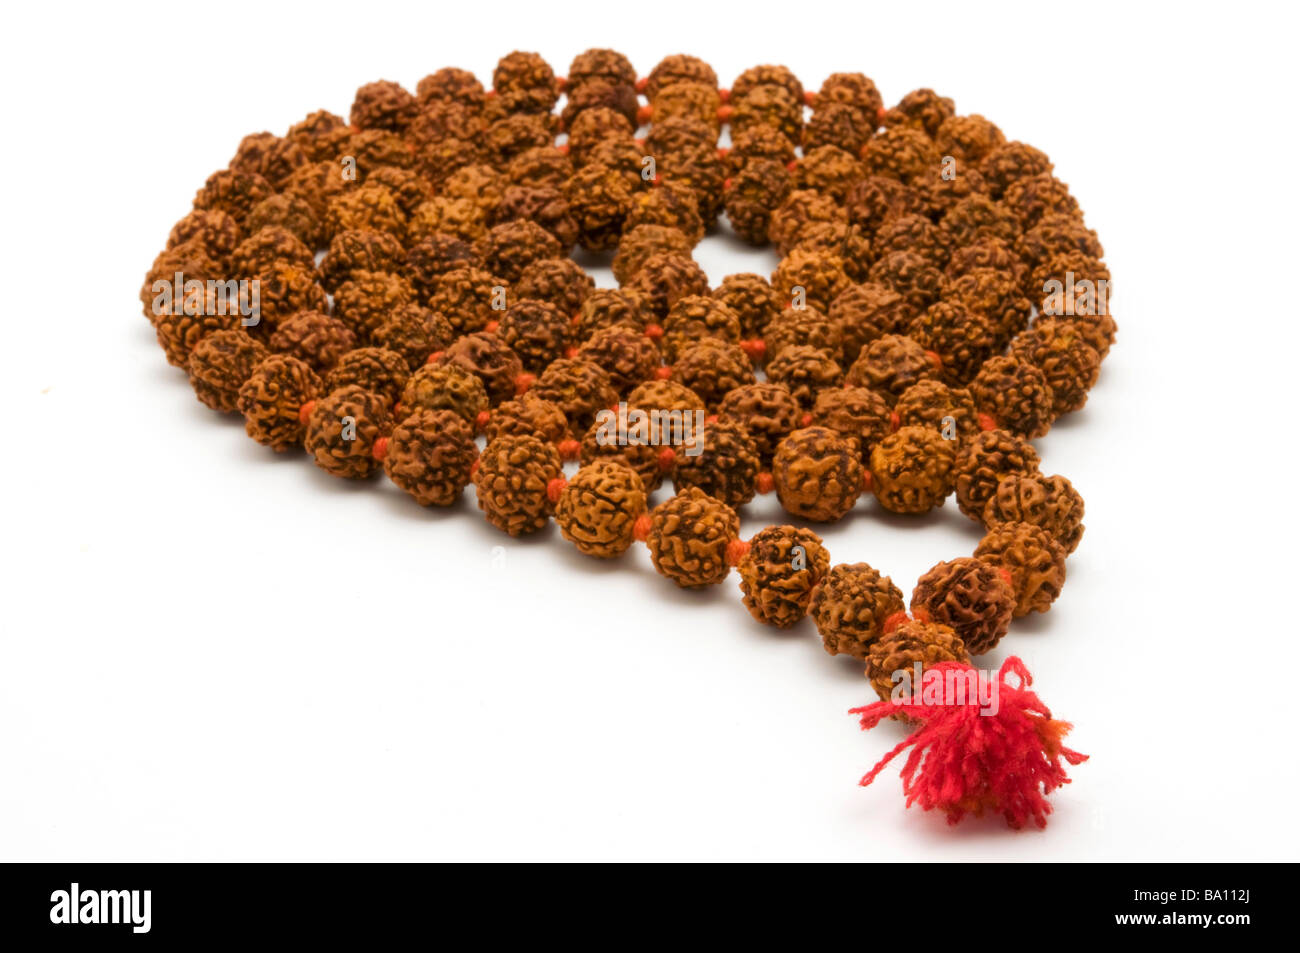 Japa Mala set of beads commonly used by Hindus and Buddhists on a white background Stock Photo